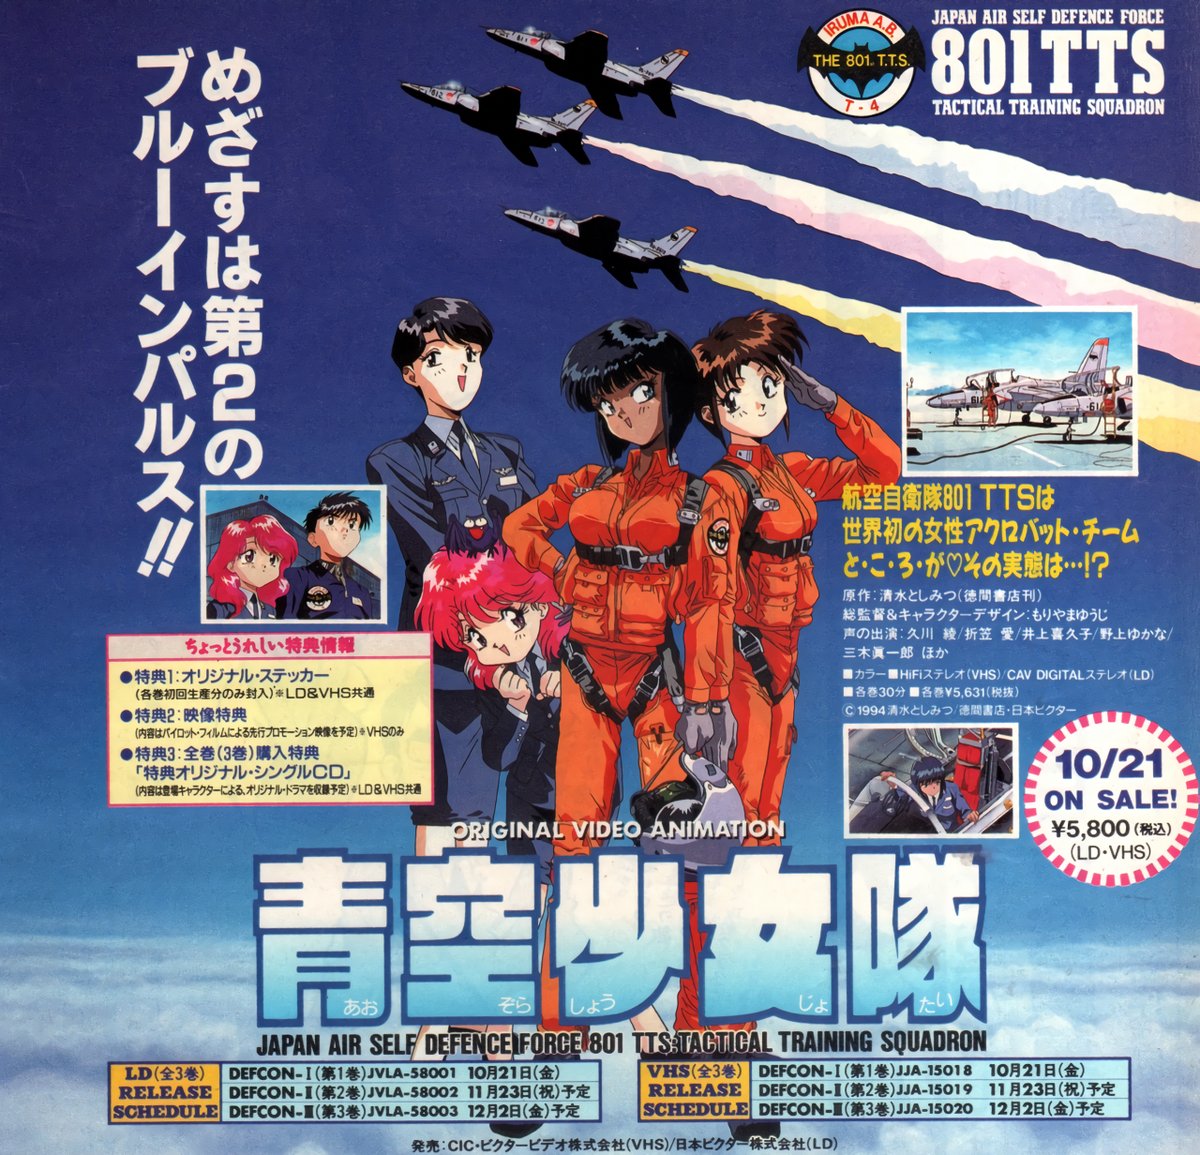 Throwback 801 T T S Airbats And Japan Defence Relation In Popular Culture Iroha Studies